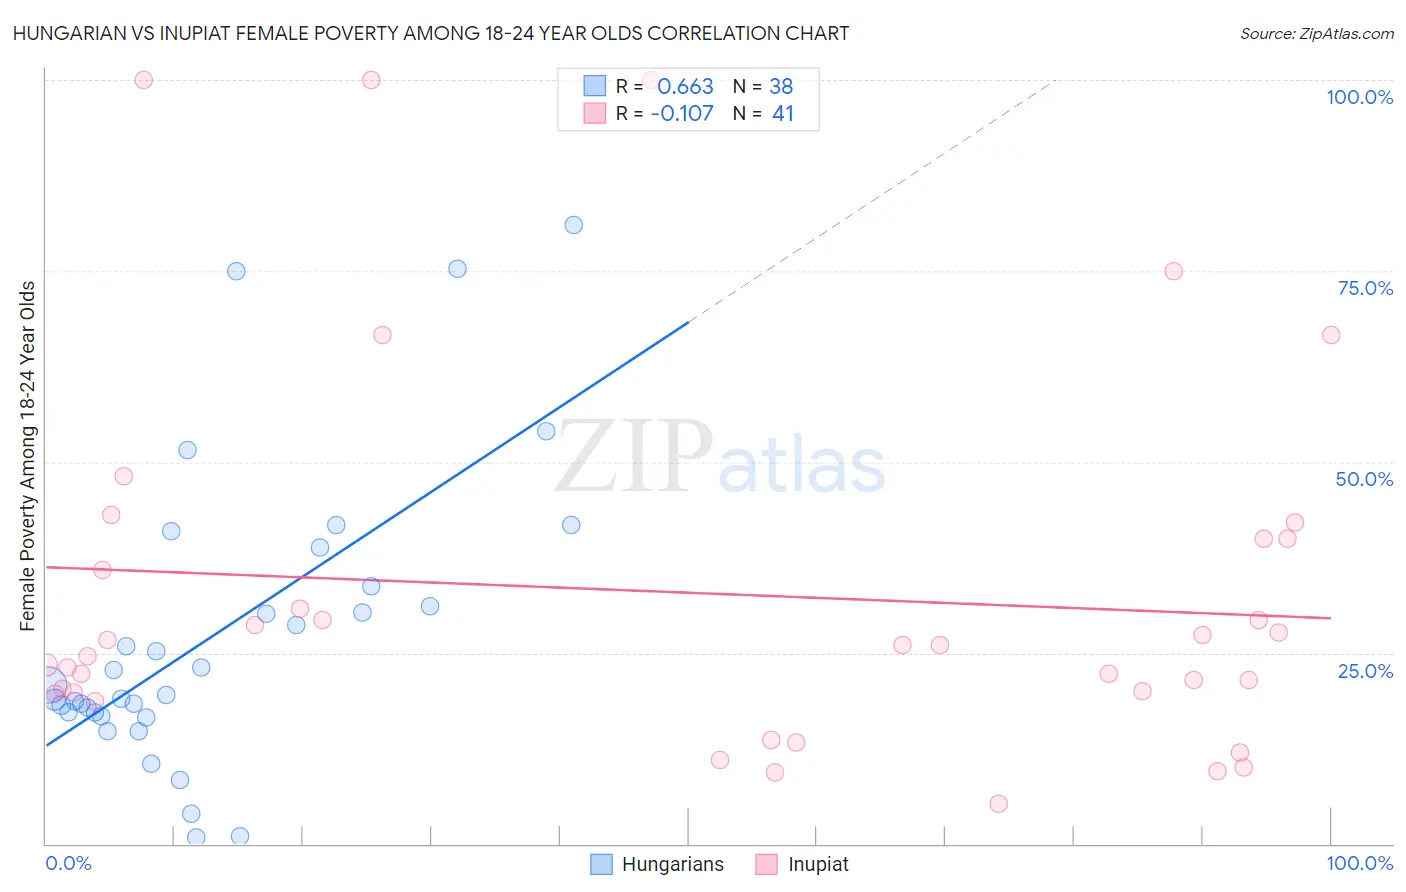 Hungarian vs Inupiat Female Poverty Among 18-24 Year Olds